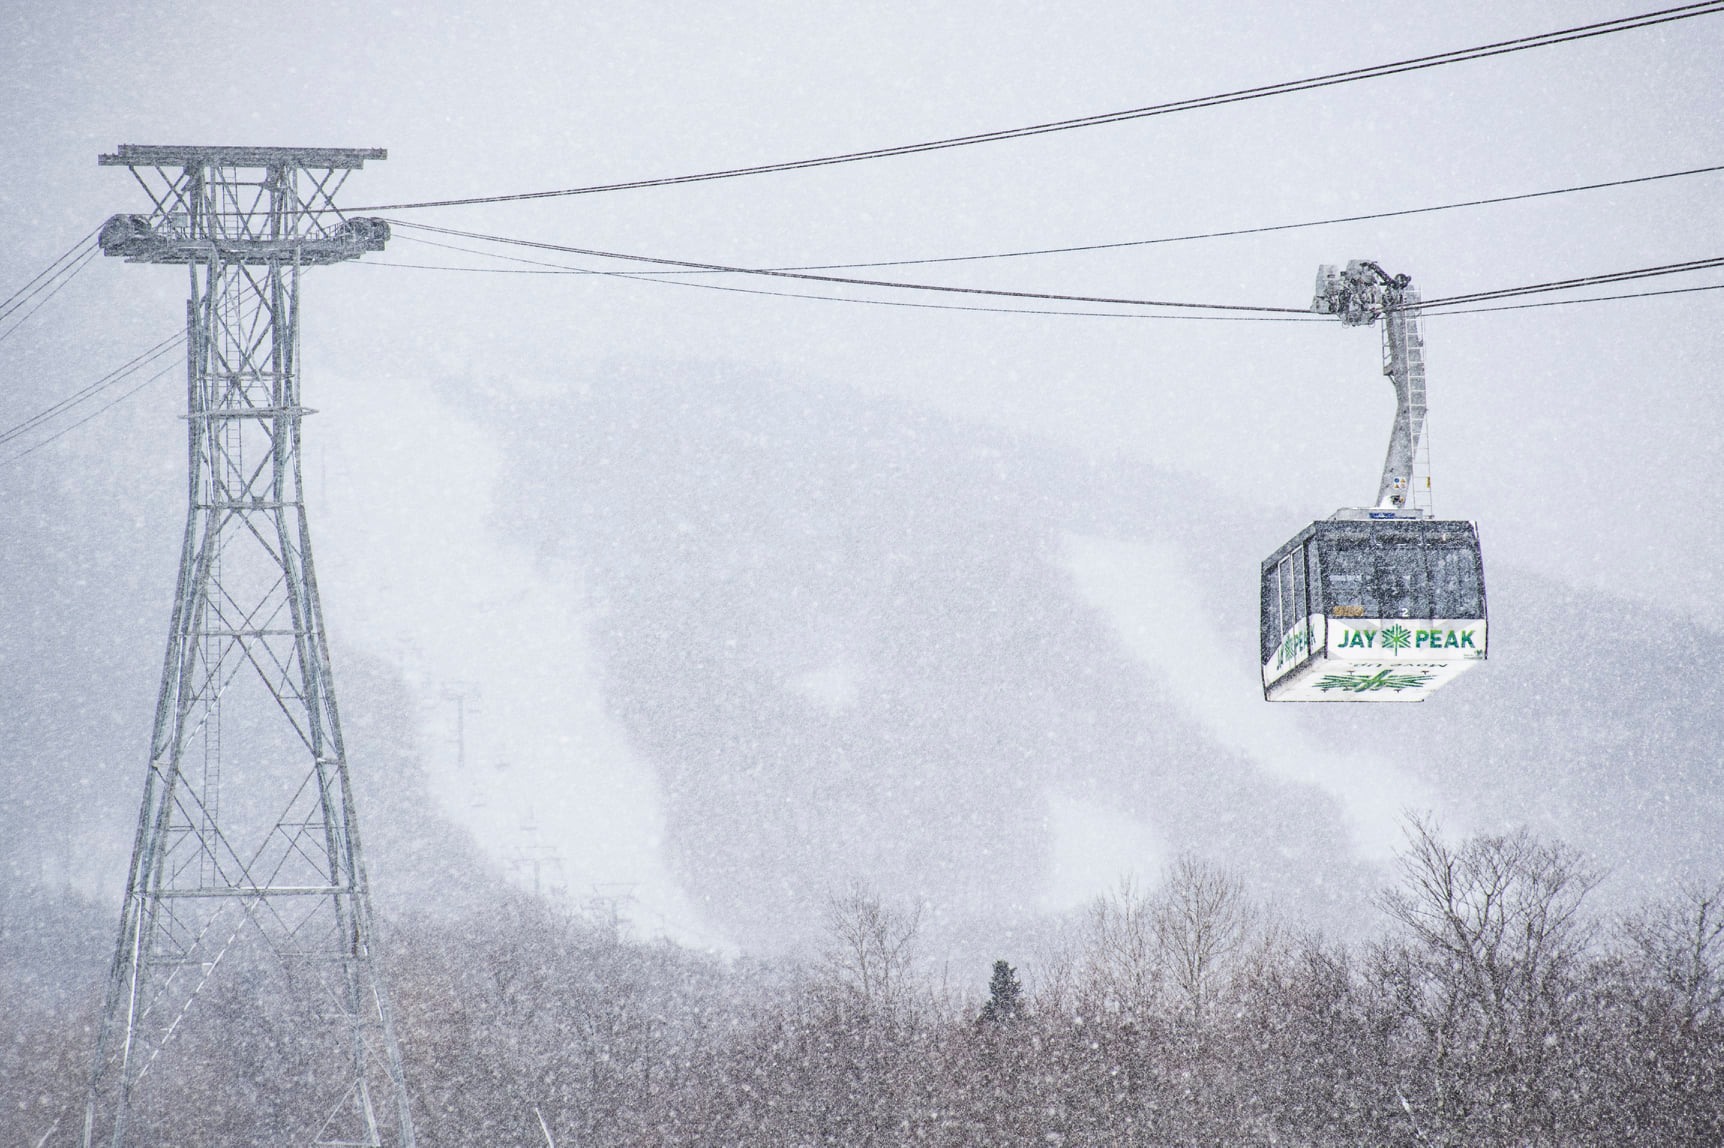 PGRI does not plan to make any major changes to Jay Peak this year